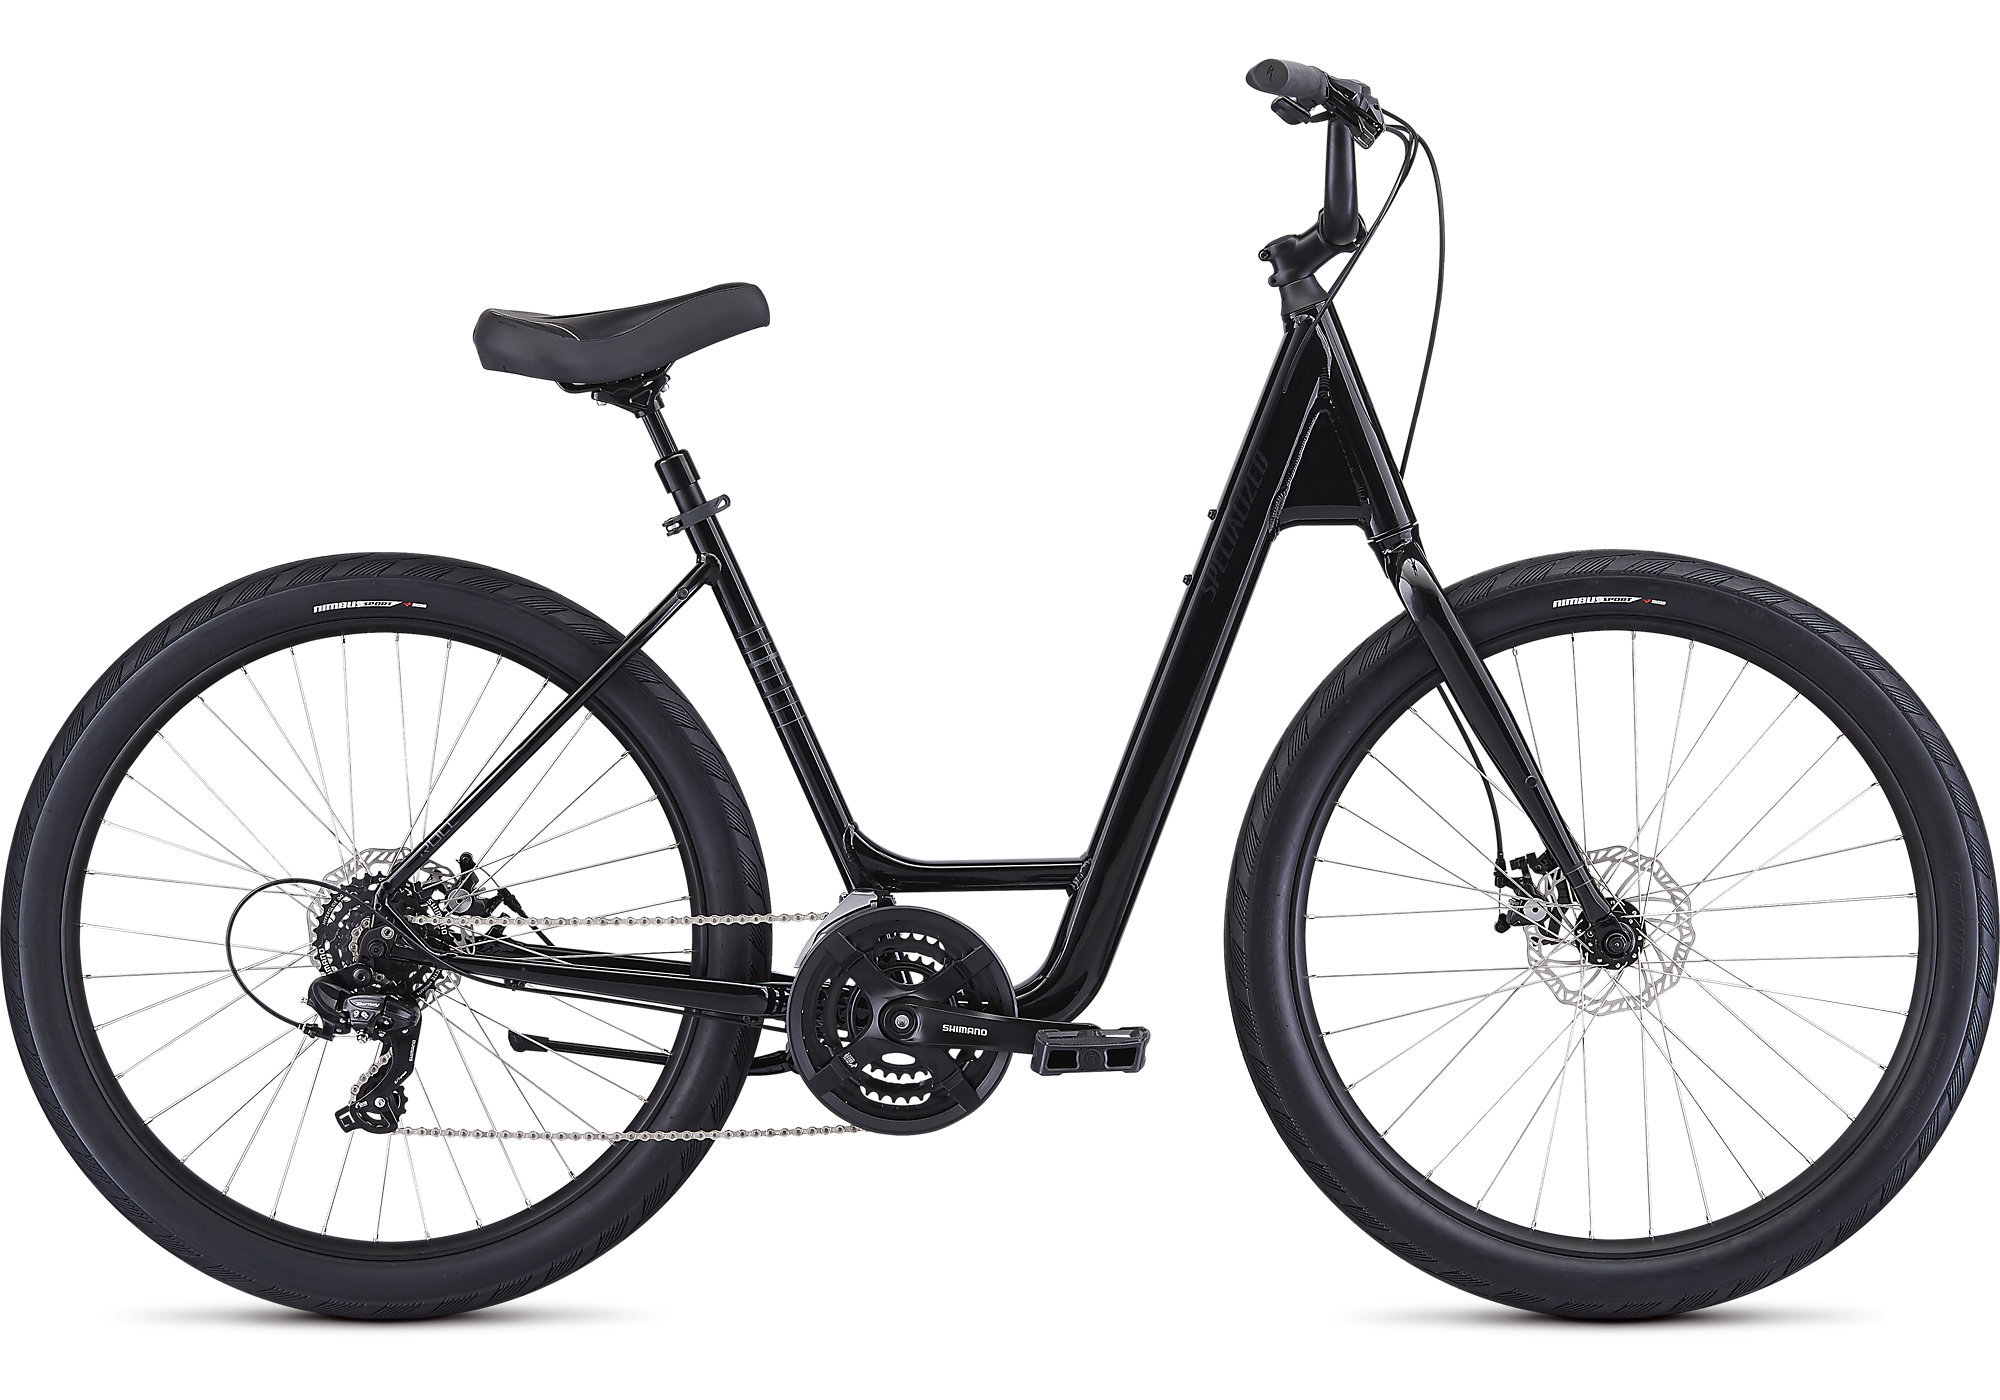 steed chainless bicycle price